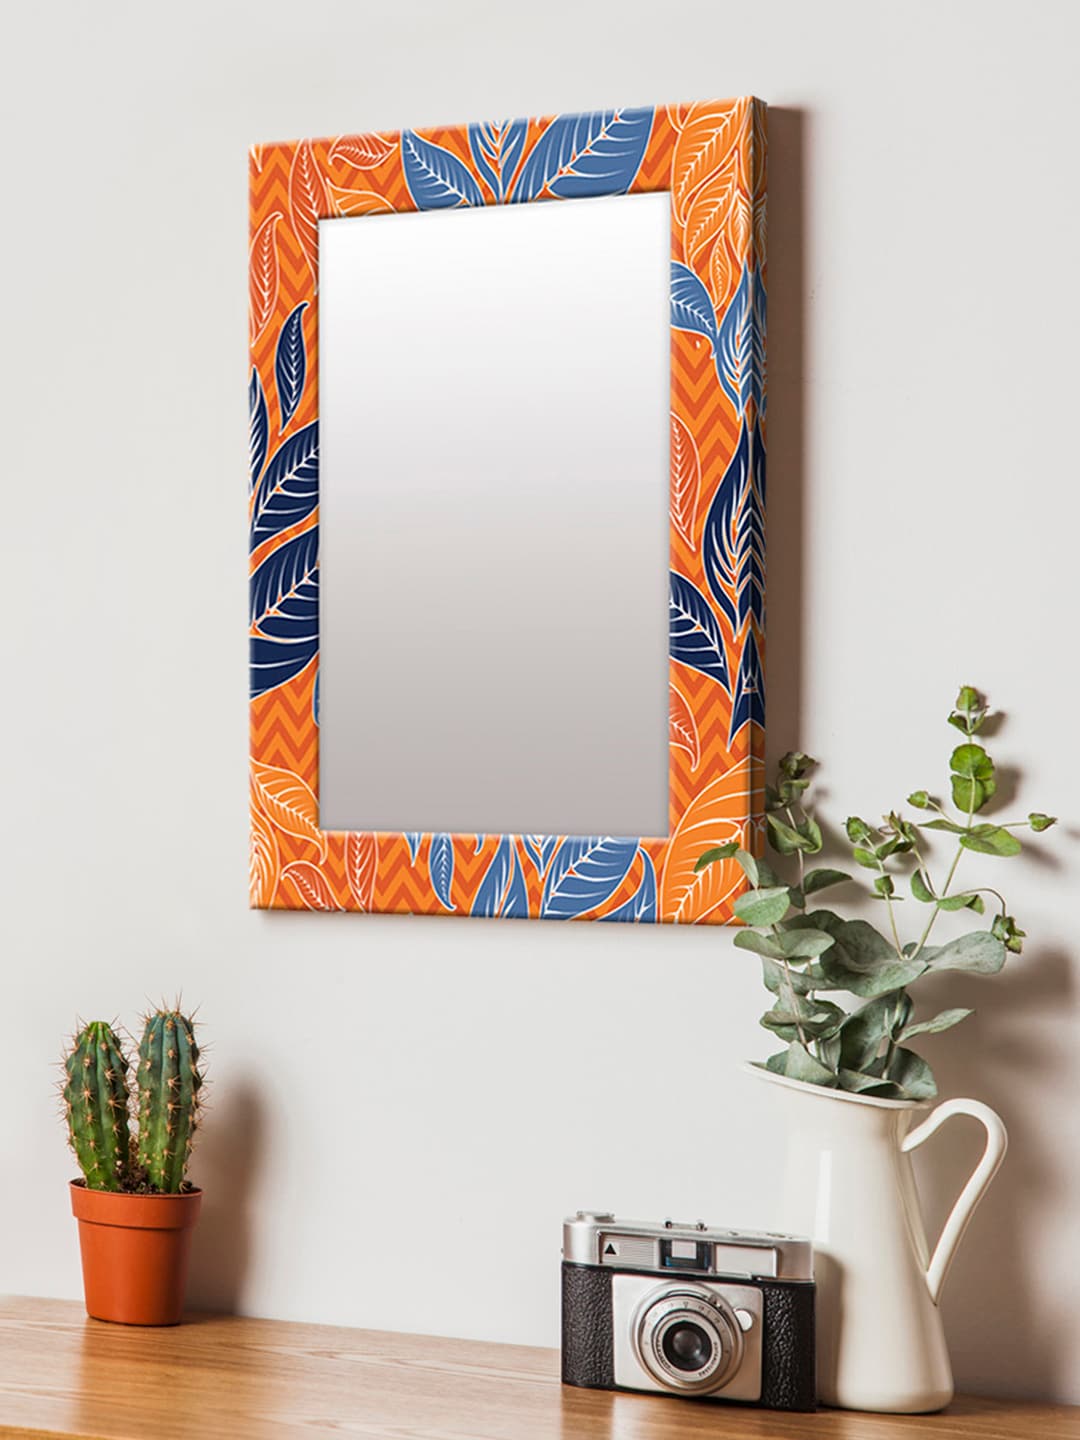 999Store Orange & Blue Printed MDF Wall Mirror Price in India